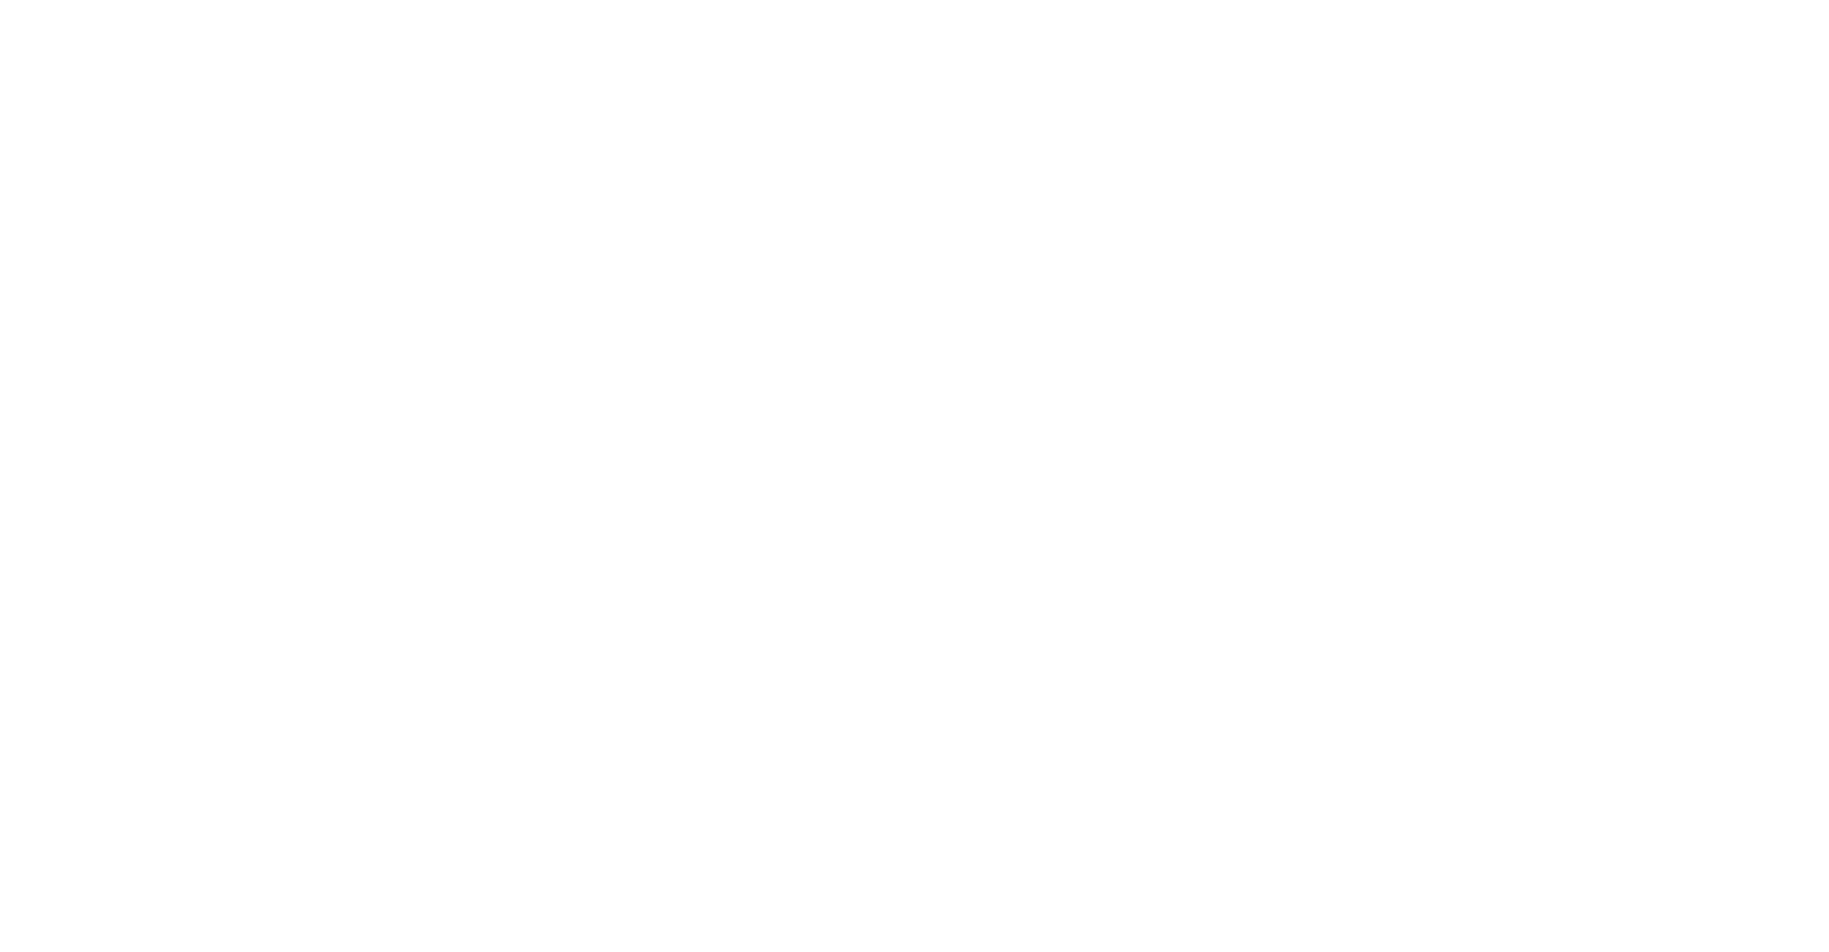 Department of Levelling Up House and Communities